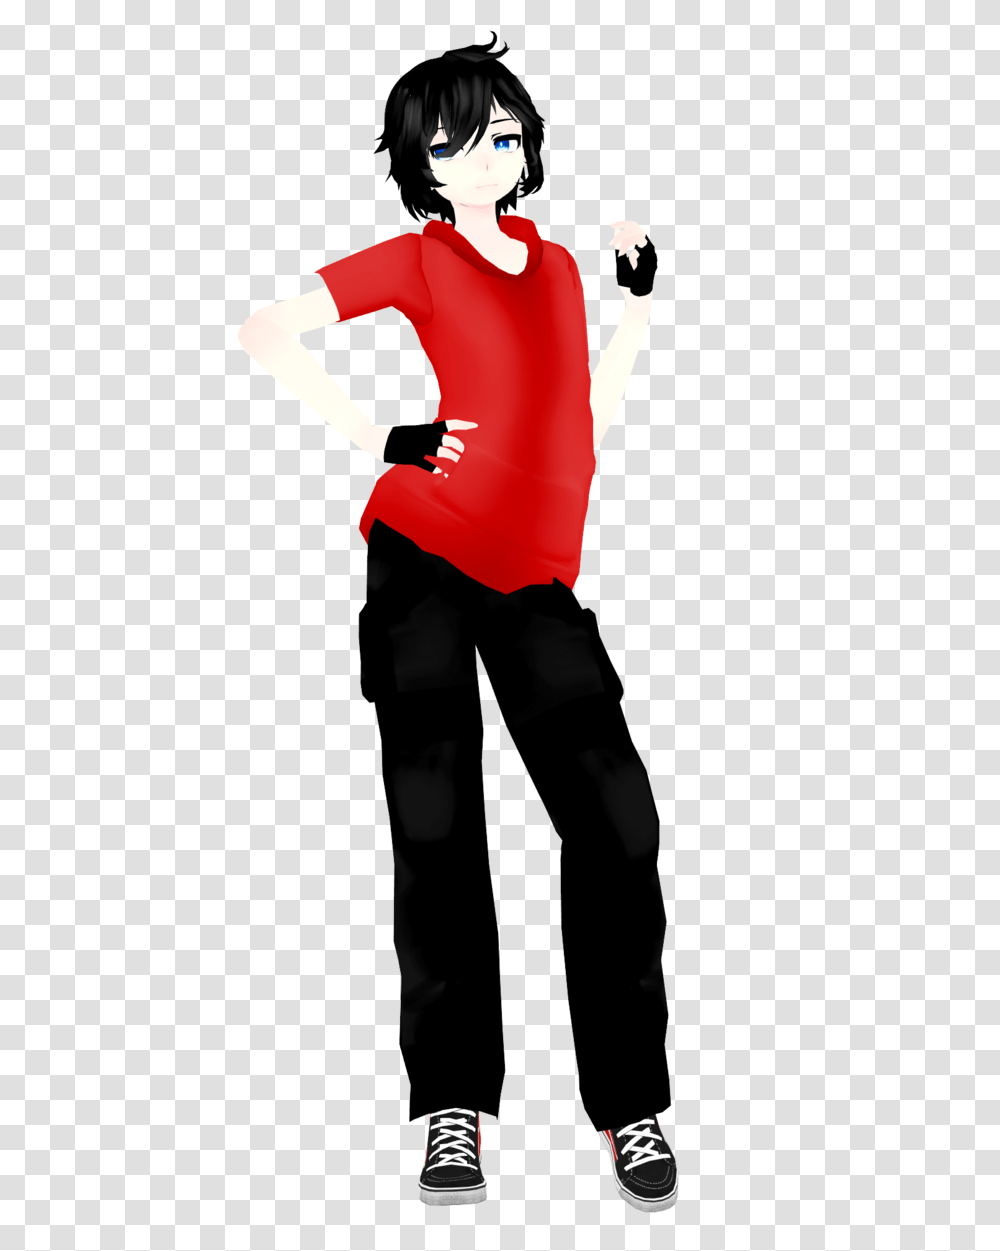 Easier Way To Port Mmd Models To Gmod Sfm, Dance Pose, Leisure Activities, Sleeve Transparent Png